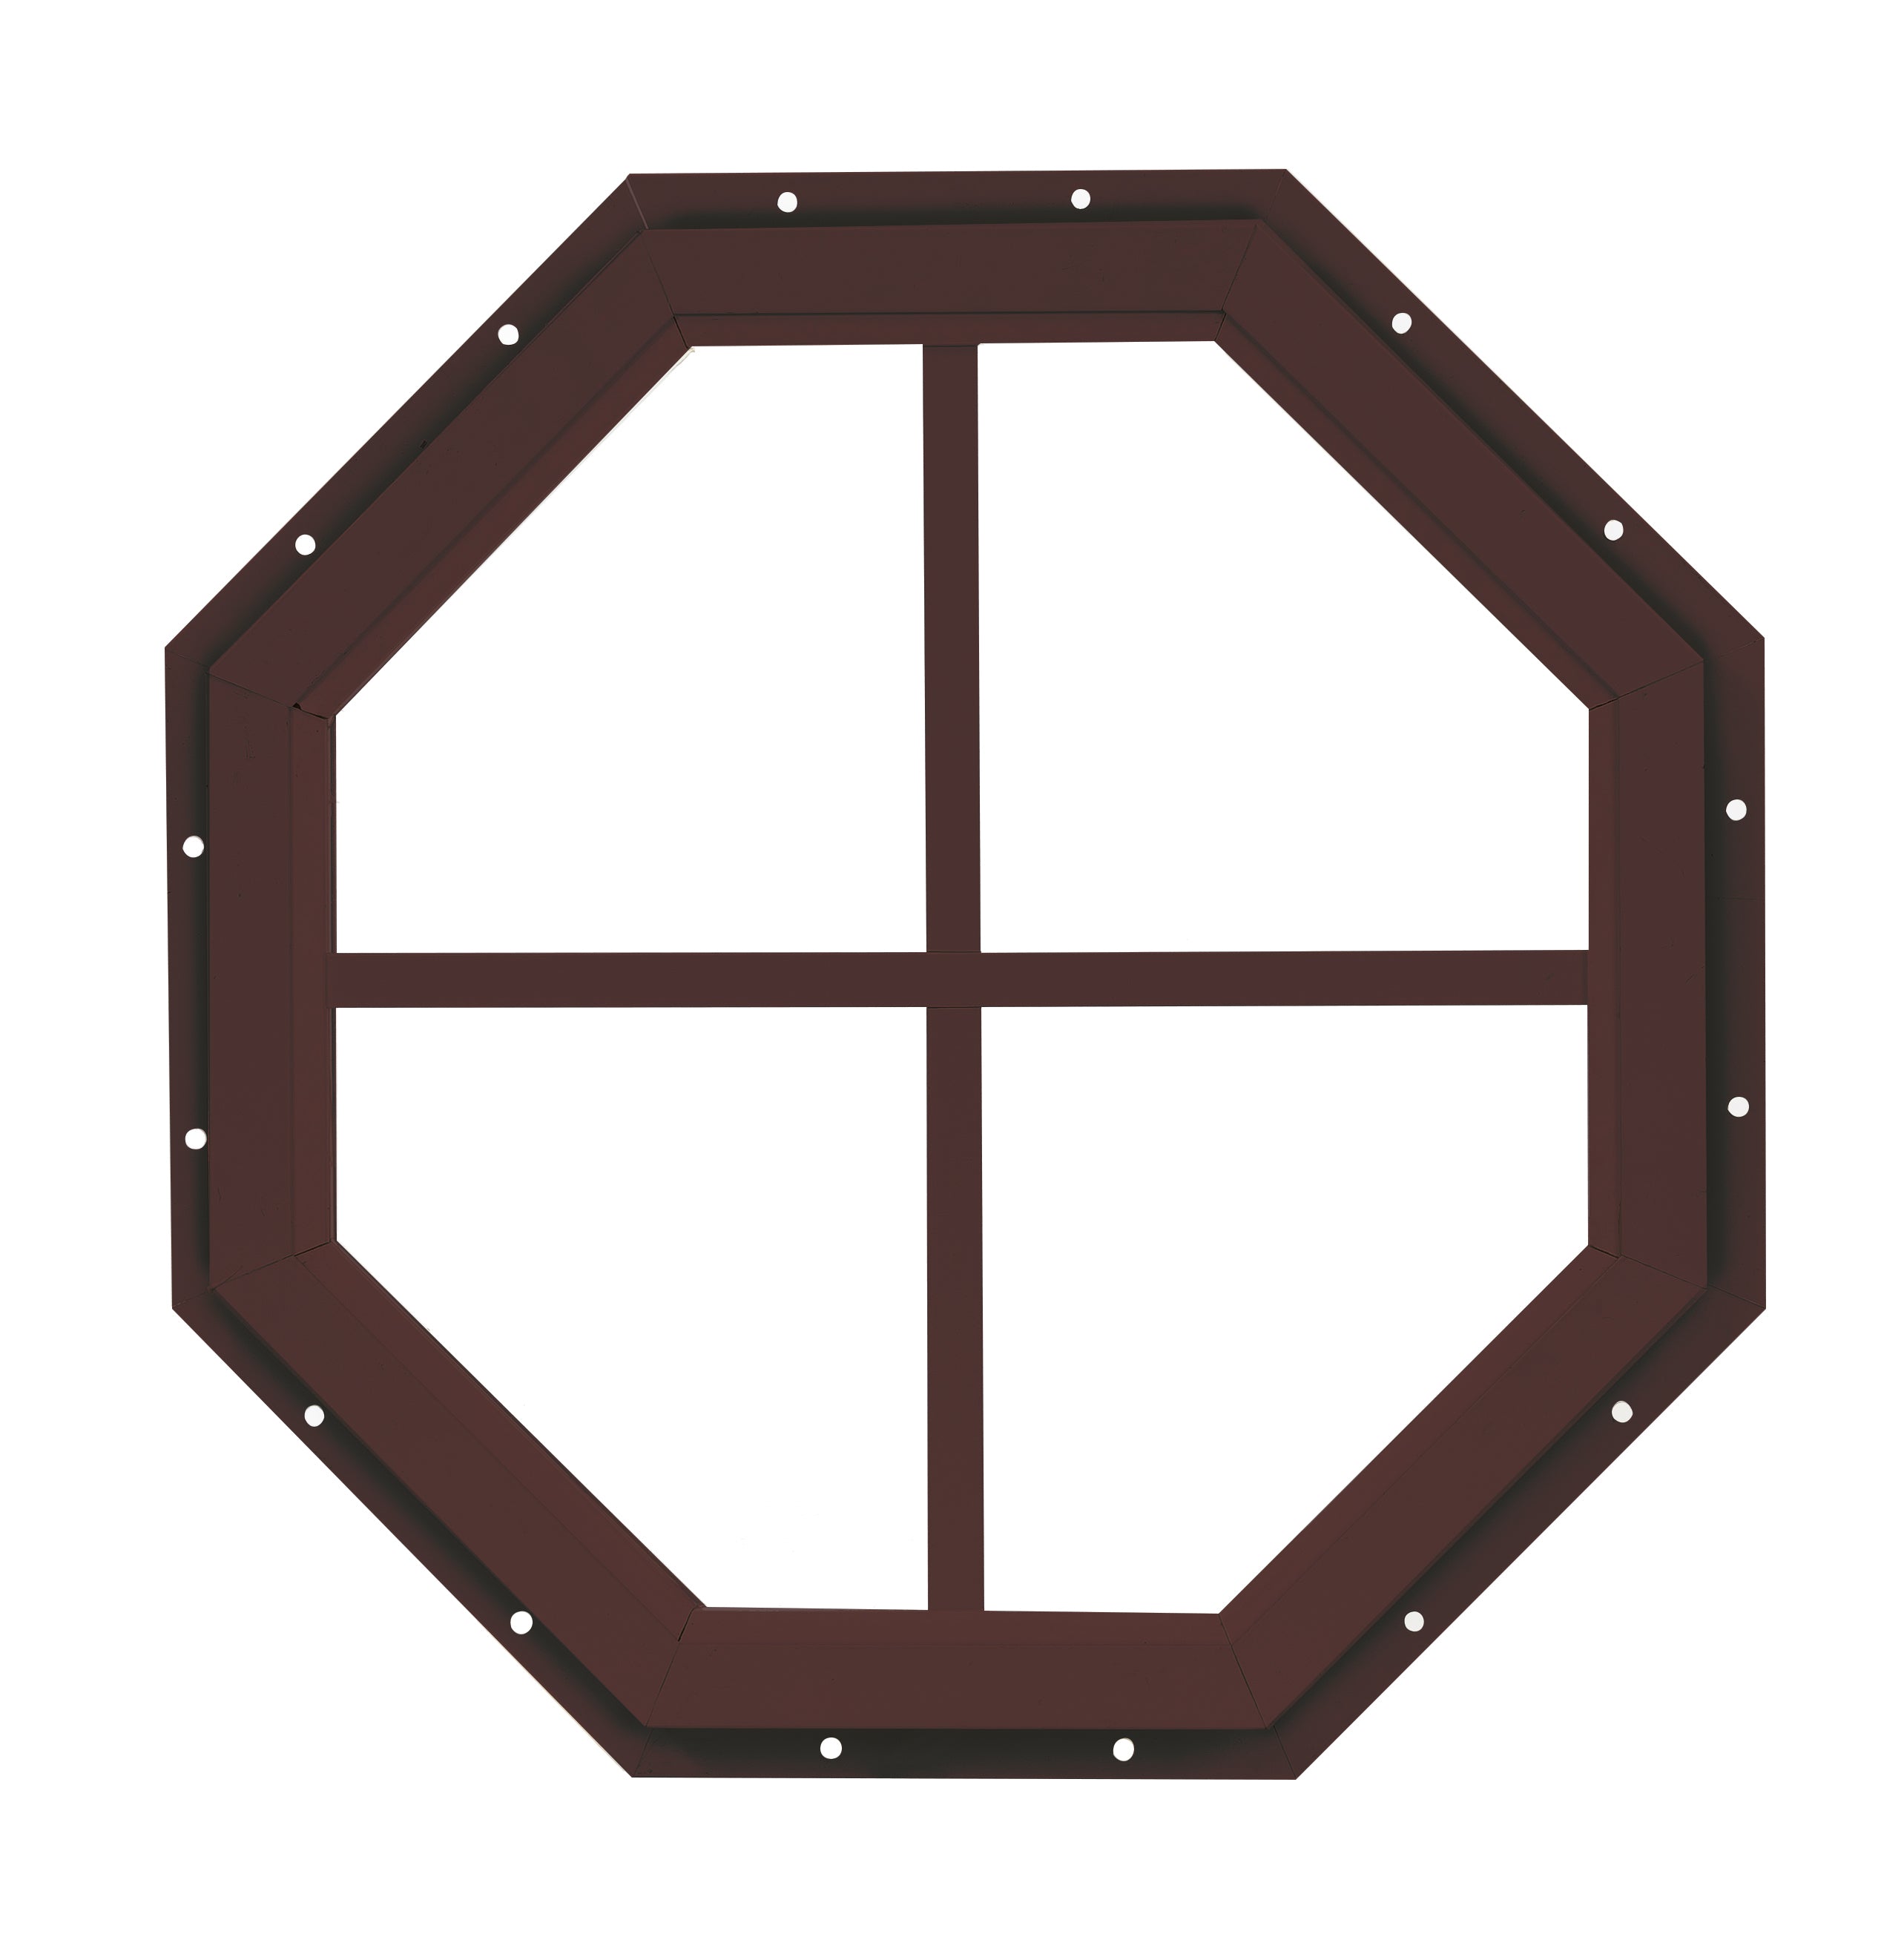 14" Octagon Gable J-Lap Mount Brown Window for Sheds, Playhouses, and MORE